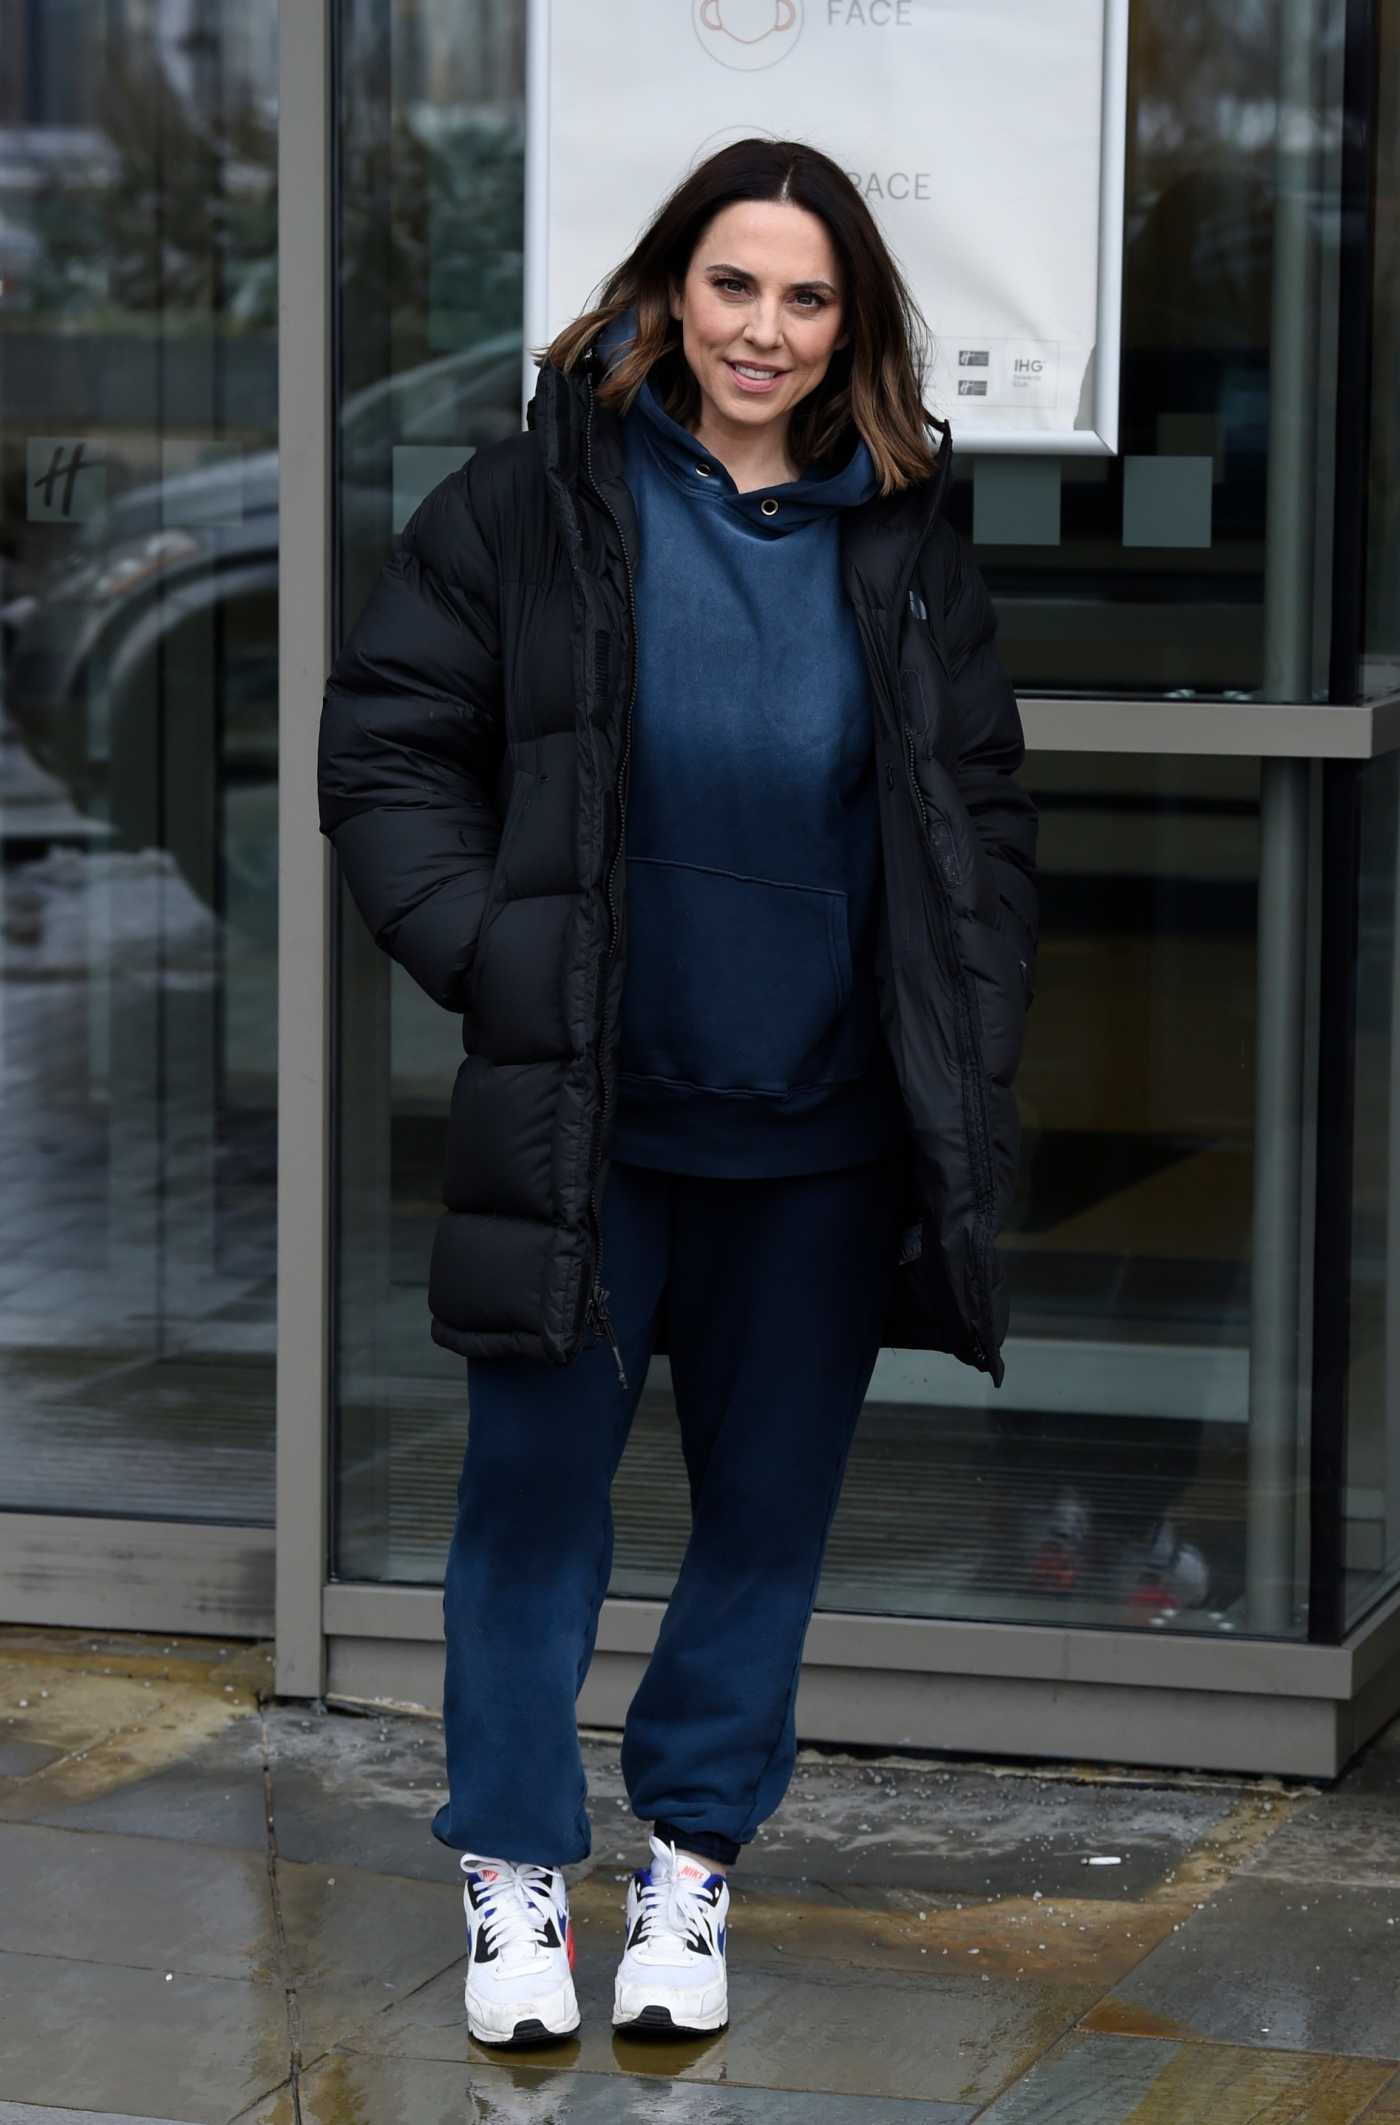 Melanie Chisholm in a Black Puffer Jacket Leaves the TV Studios at Media City in Manchester 01/23/2021